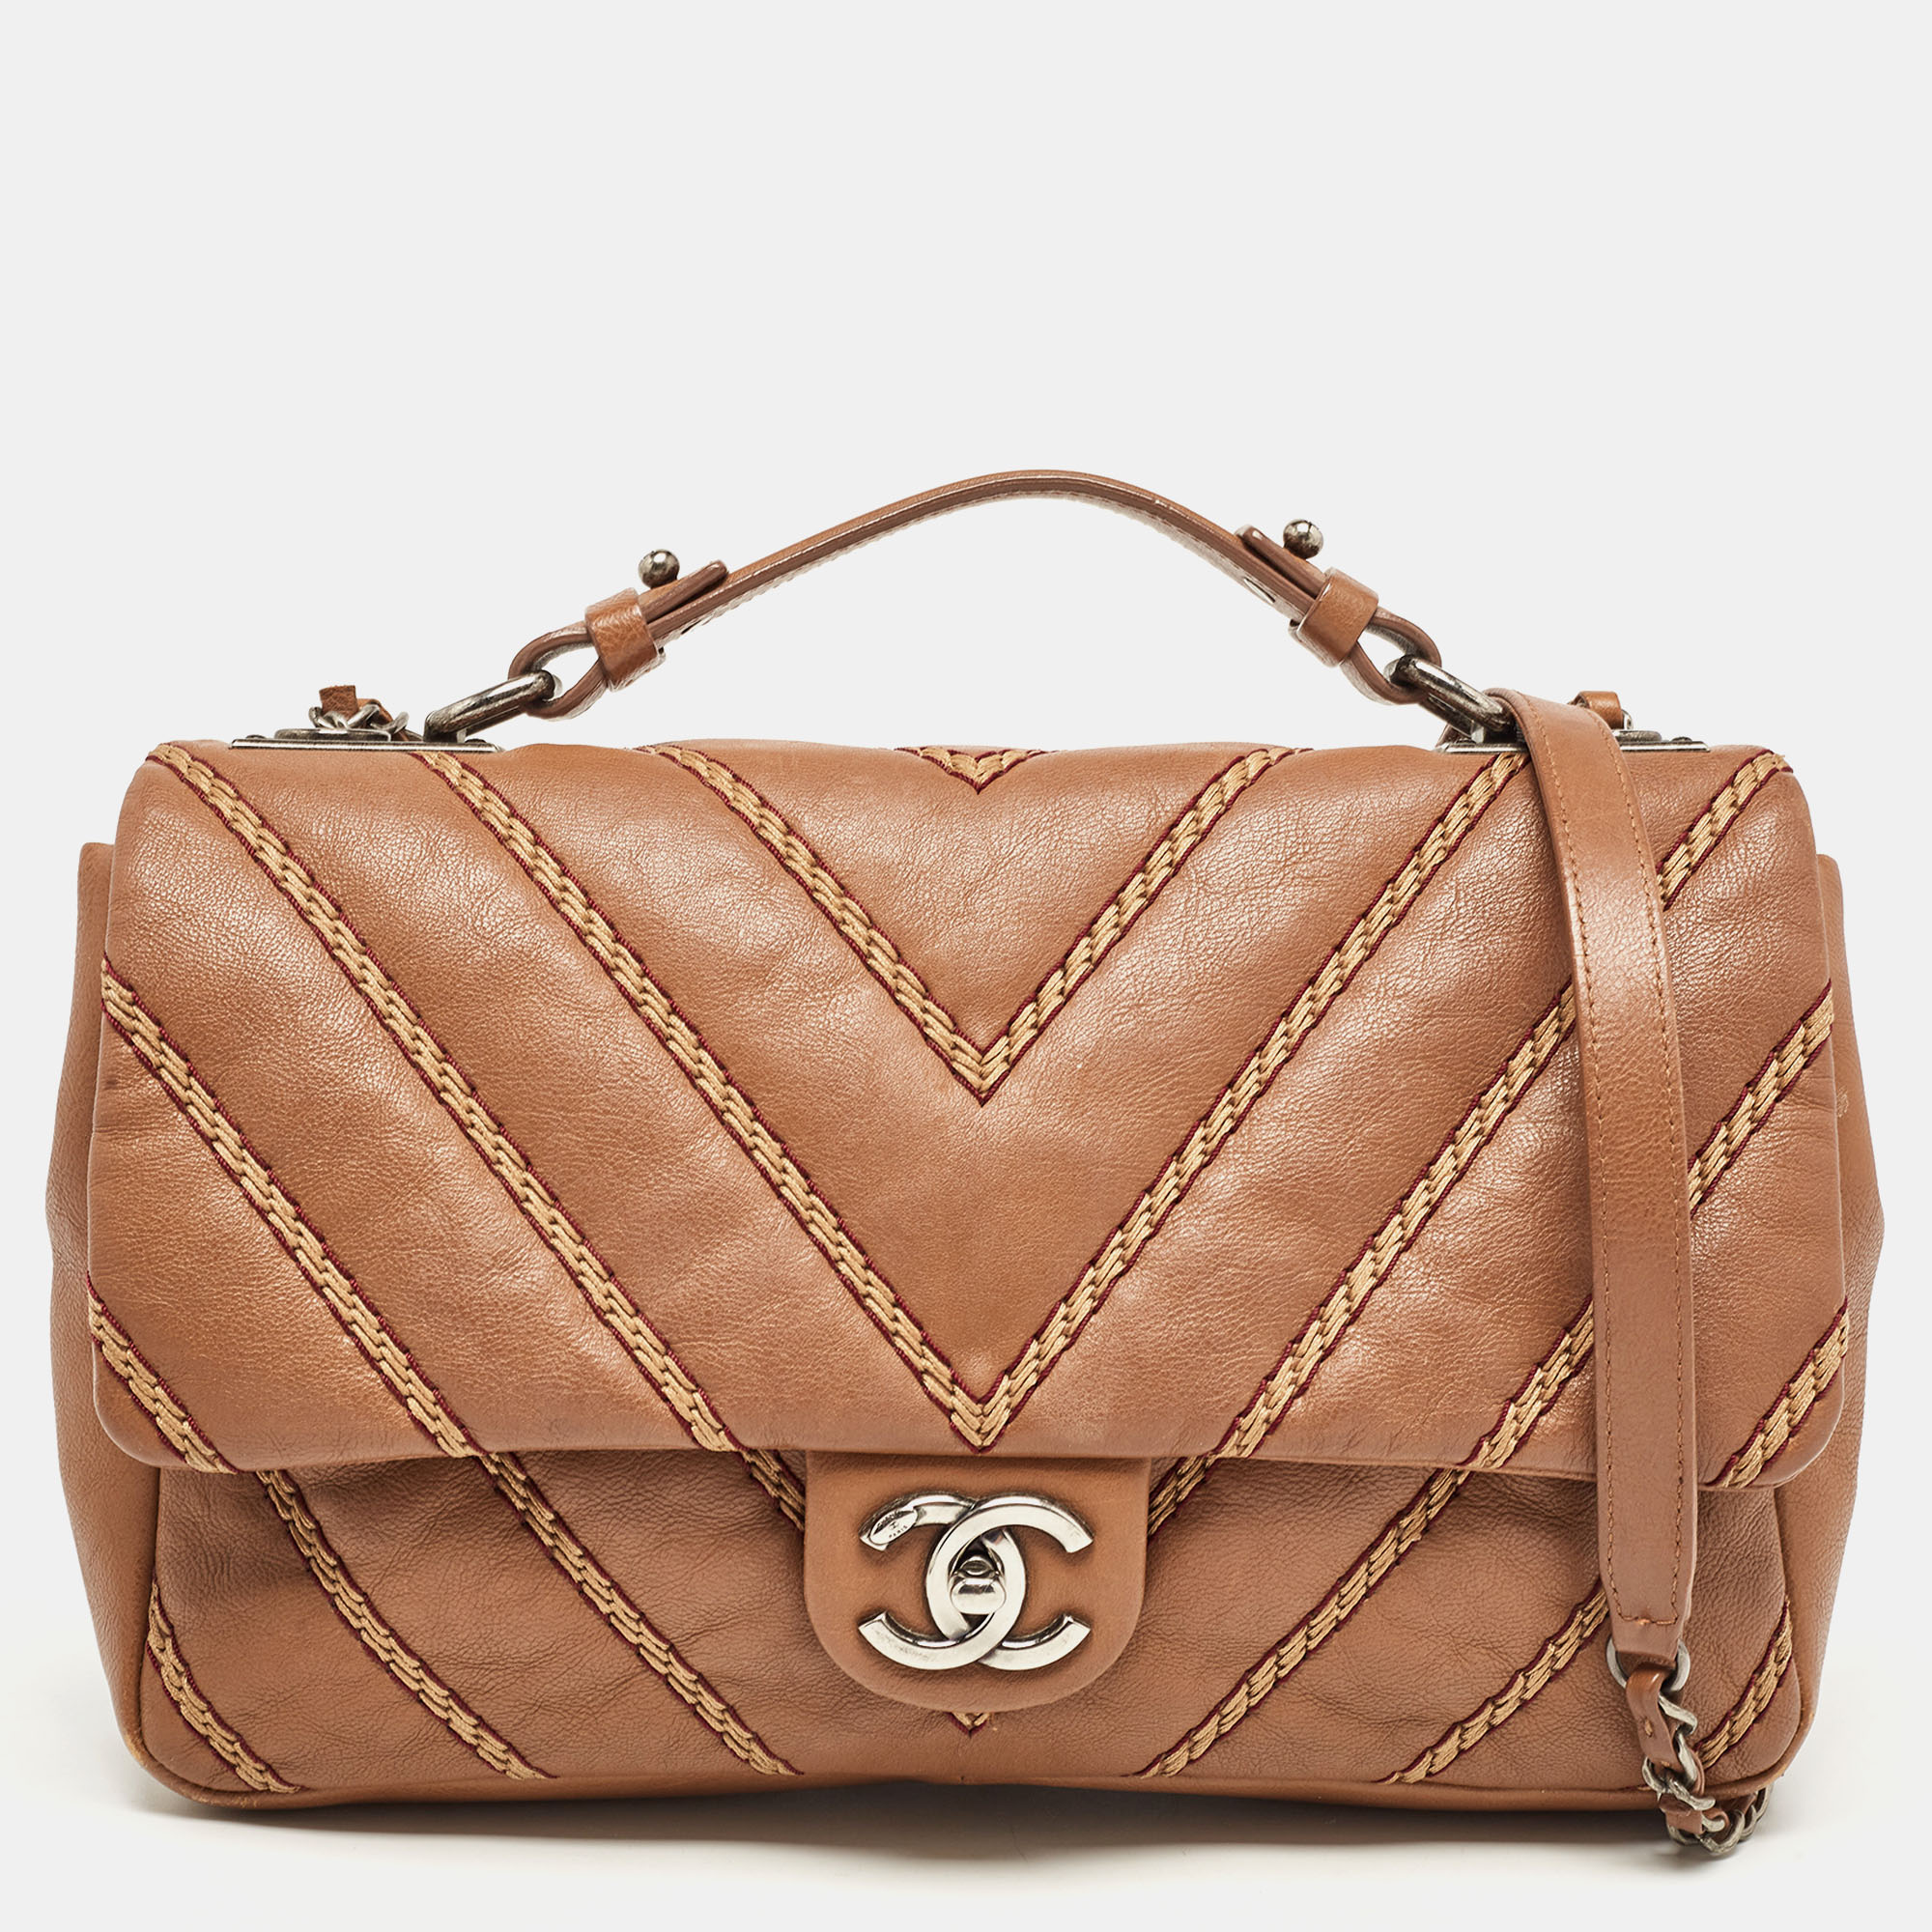 Chanel brown chevron stitched leather classic top handle bag